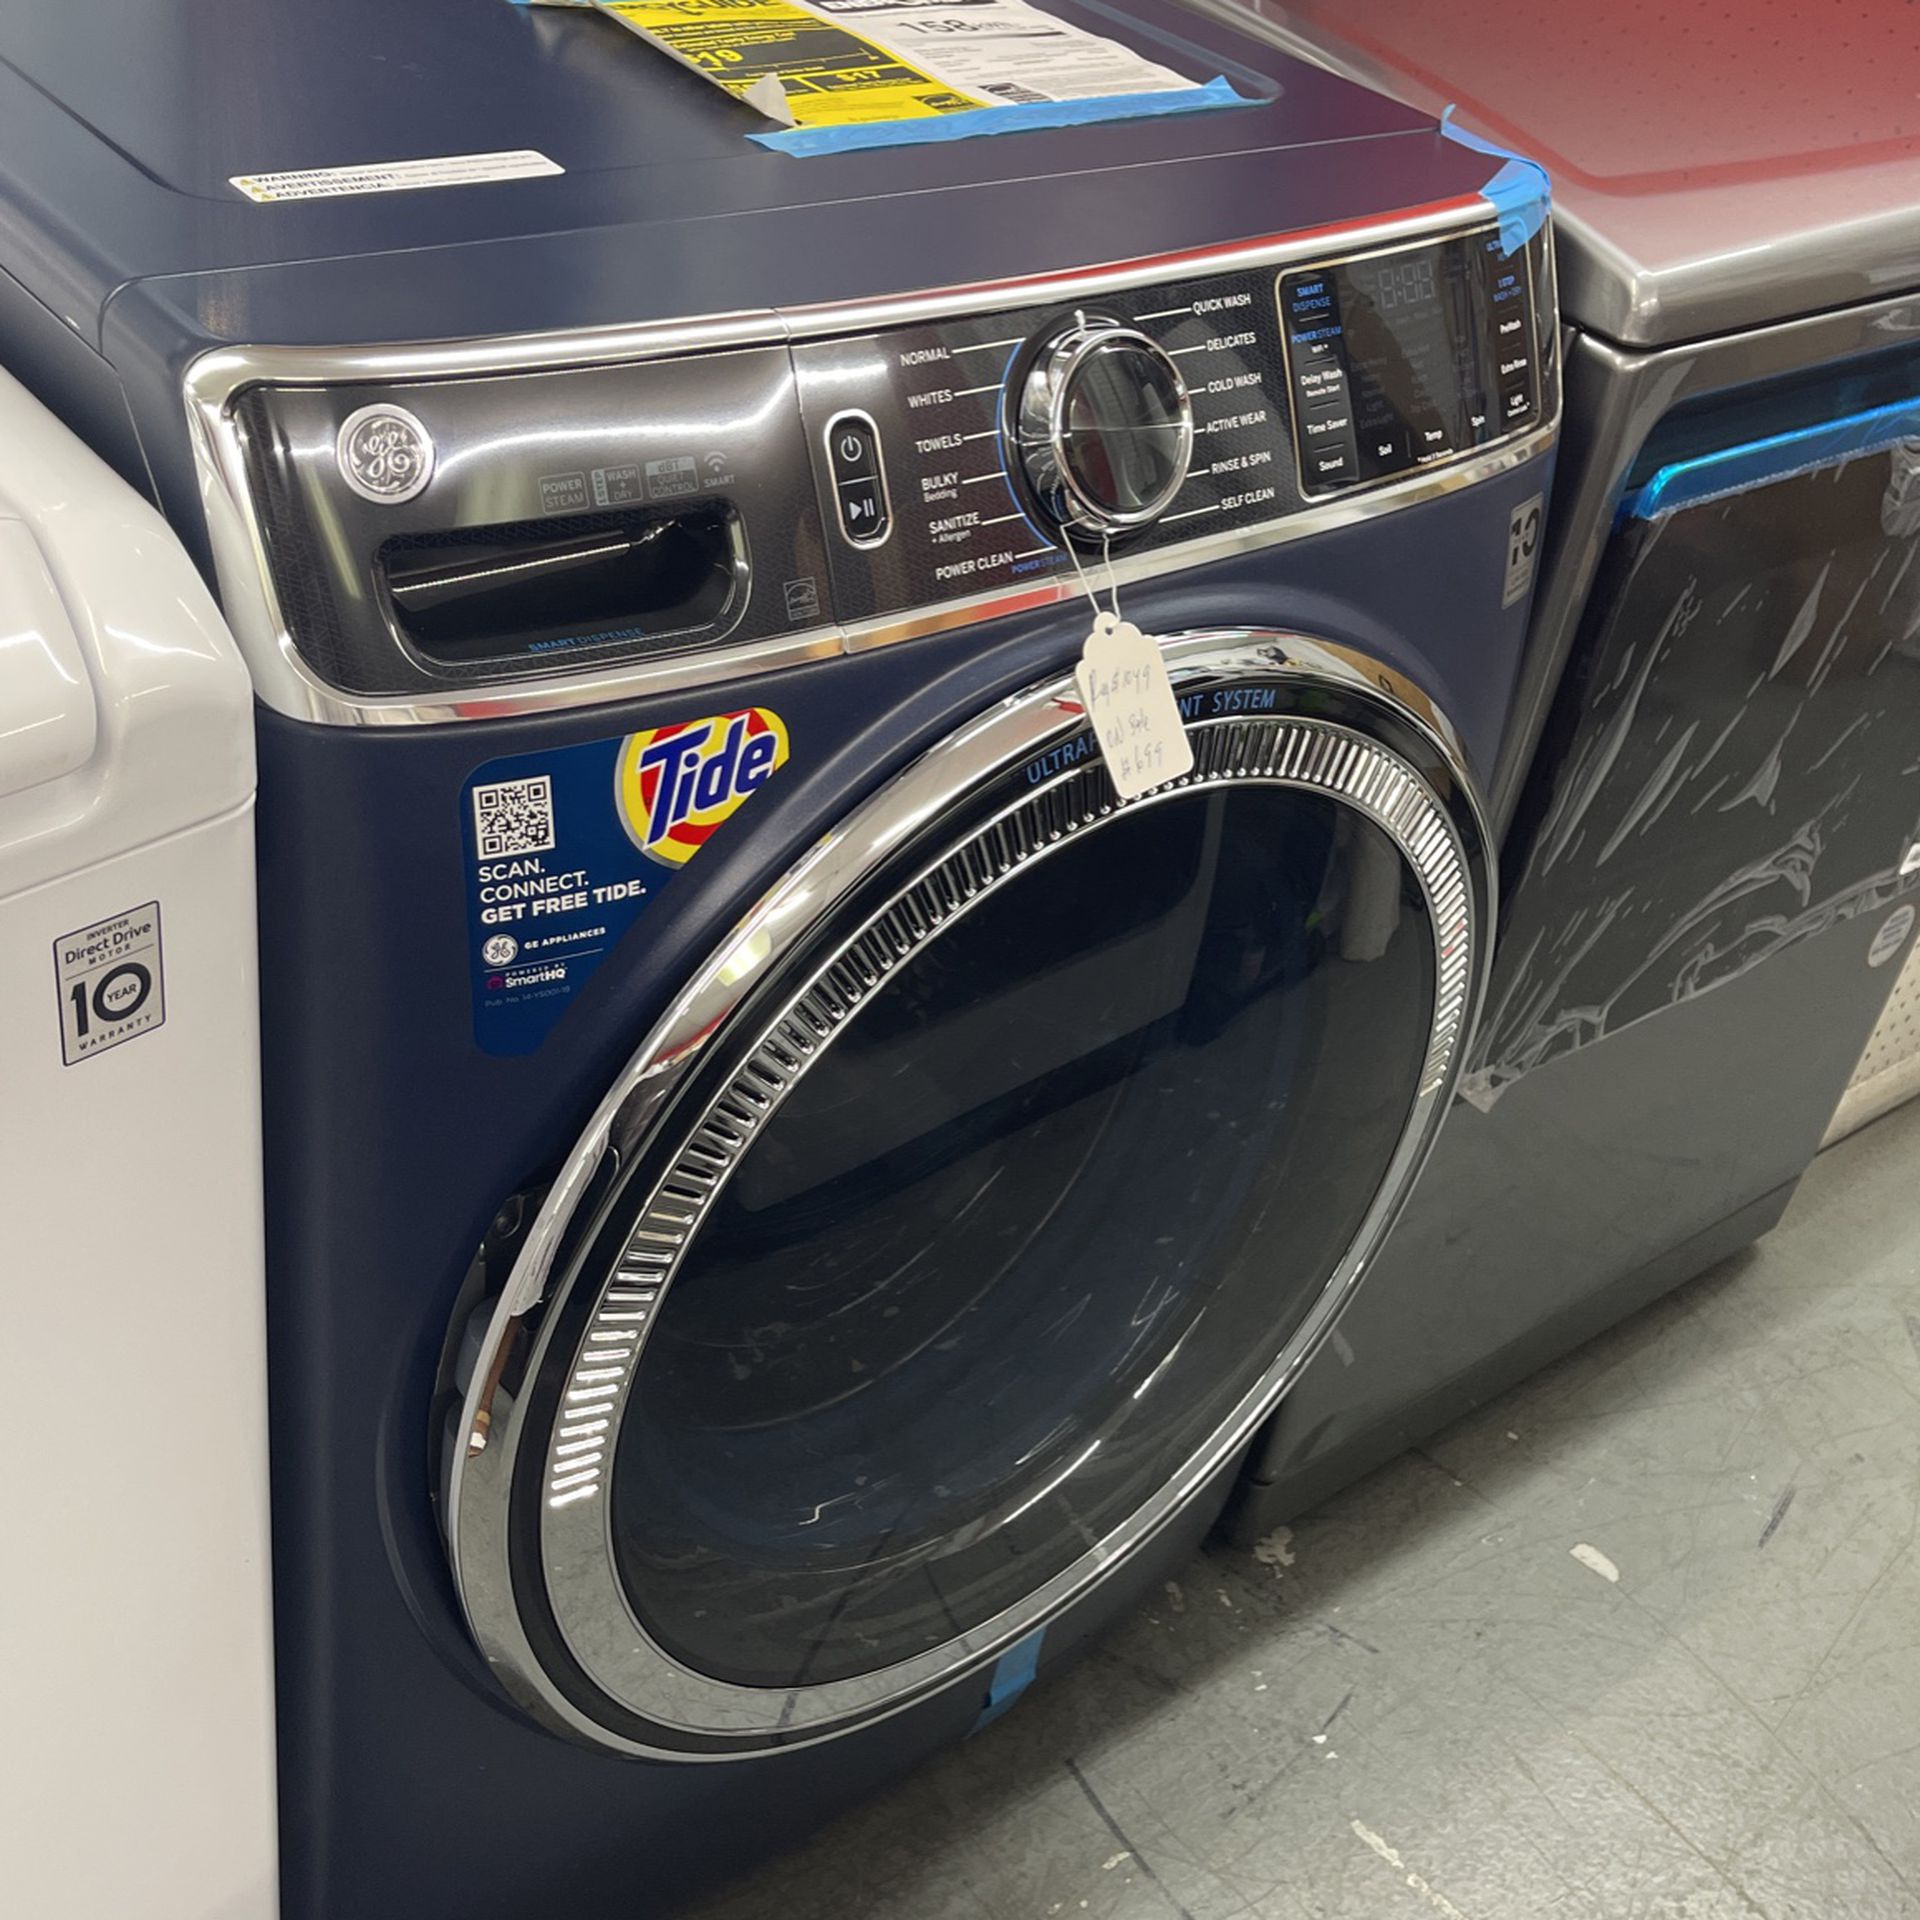 New Scratch And Dent GE Front Load Washer. 1 Year Warranty 